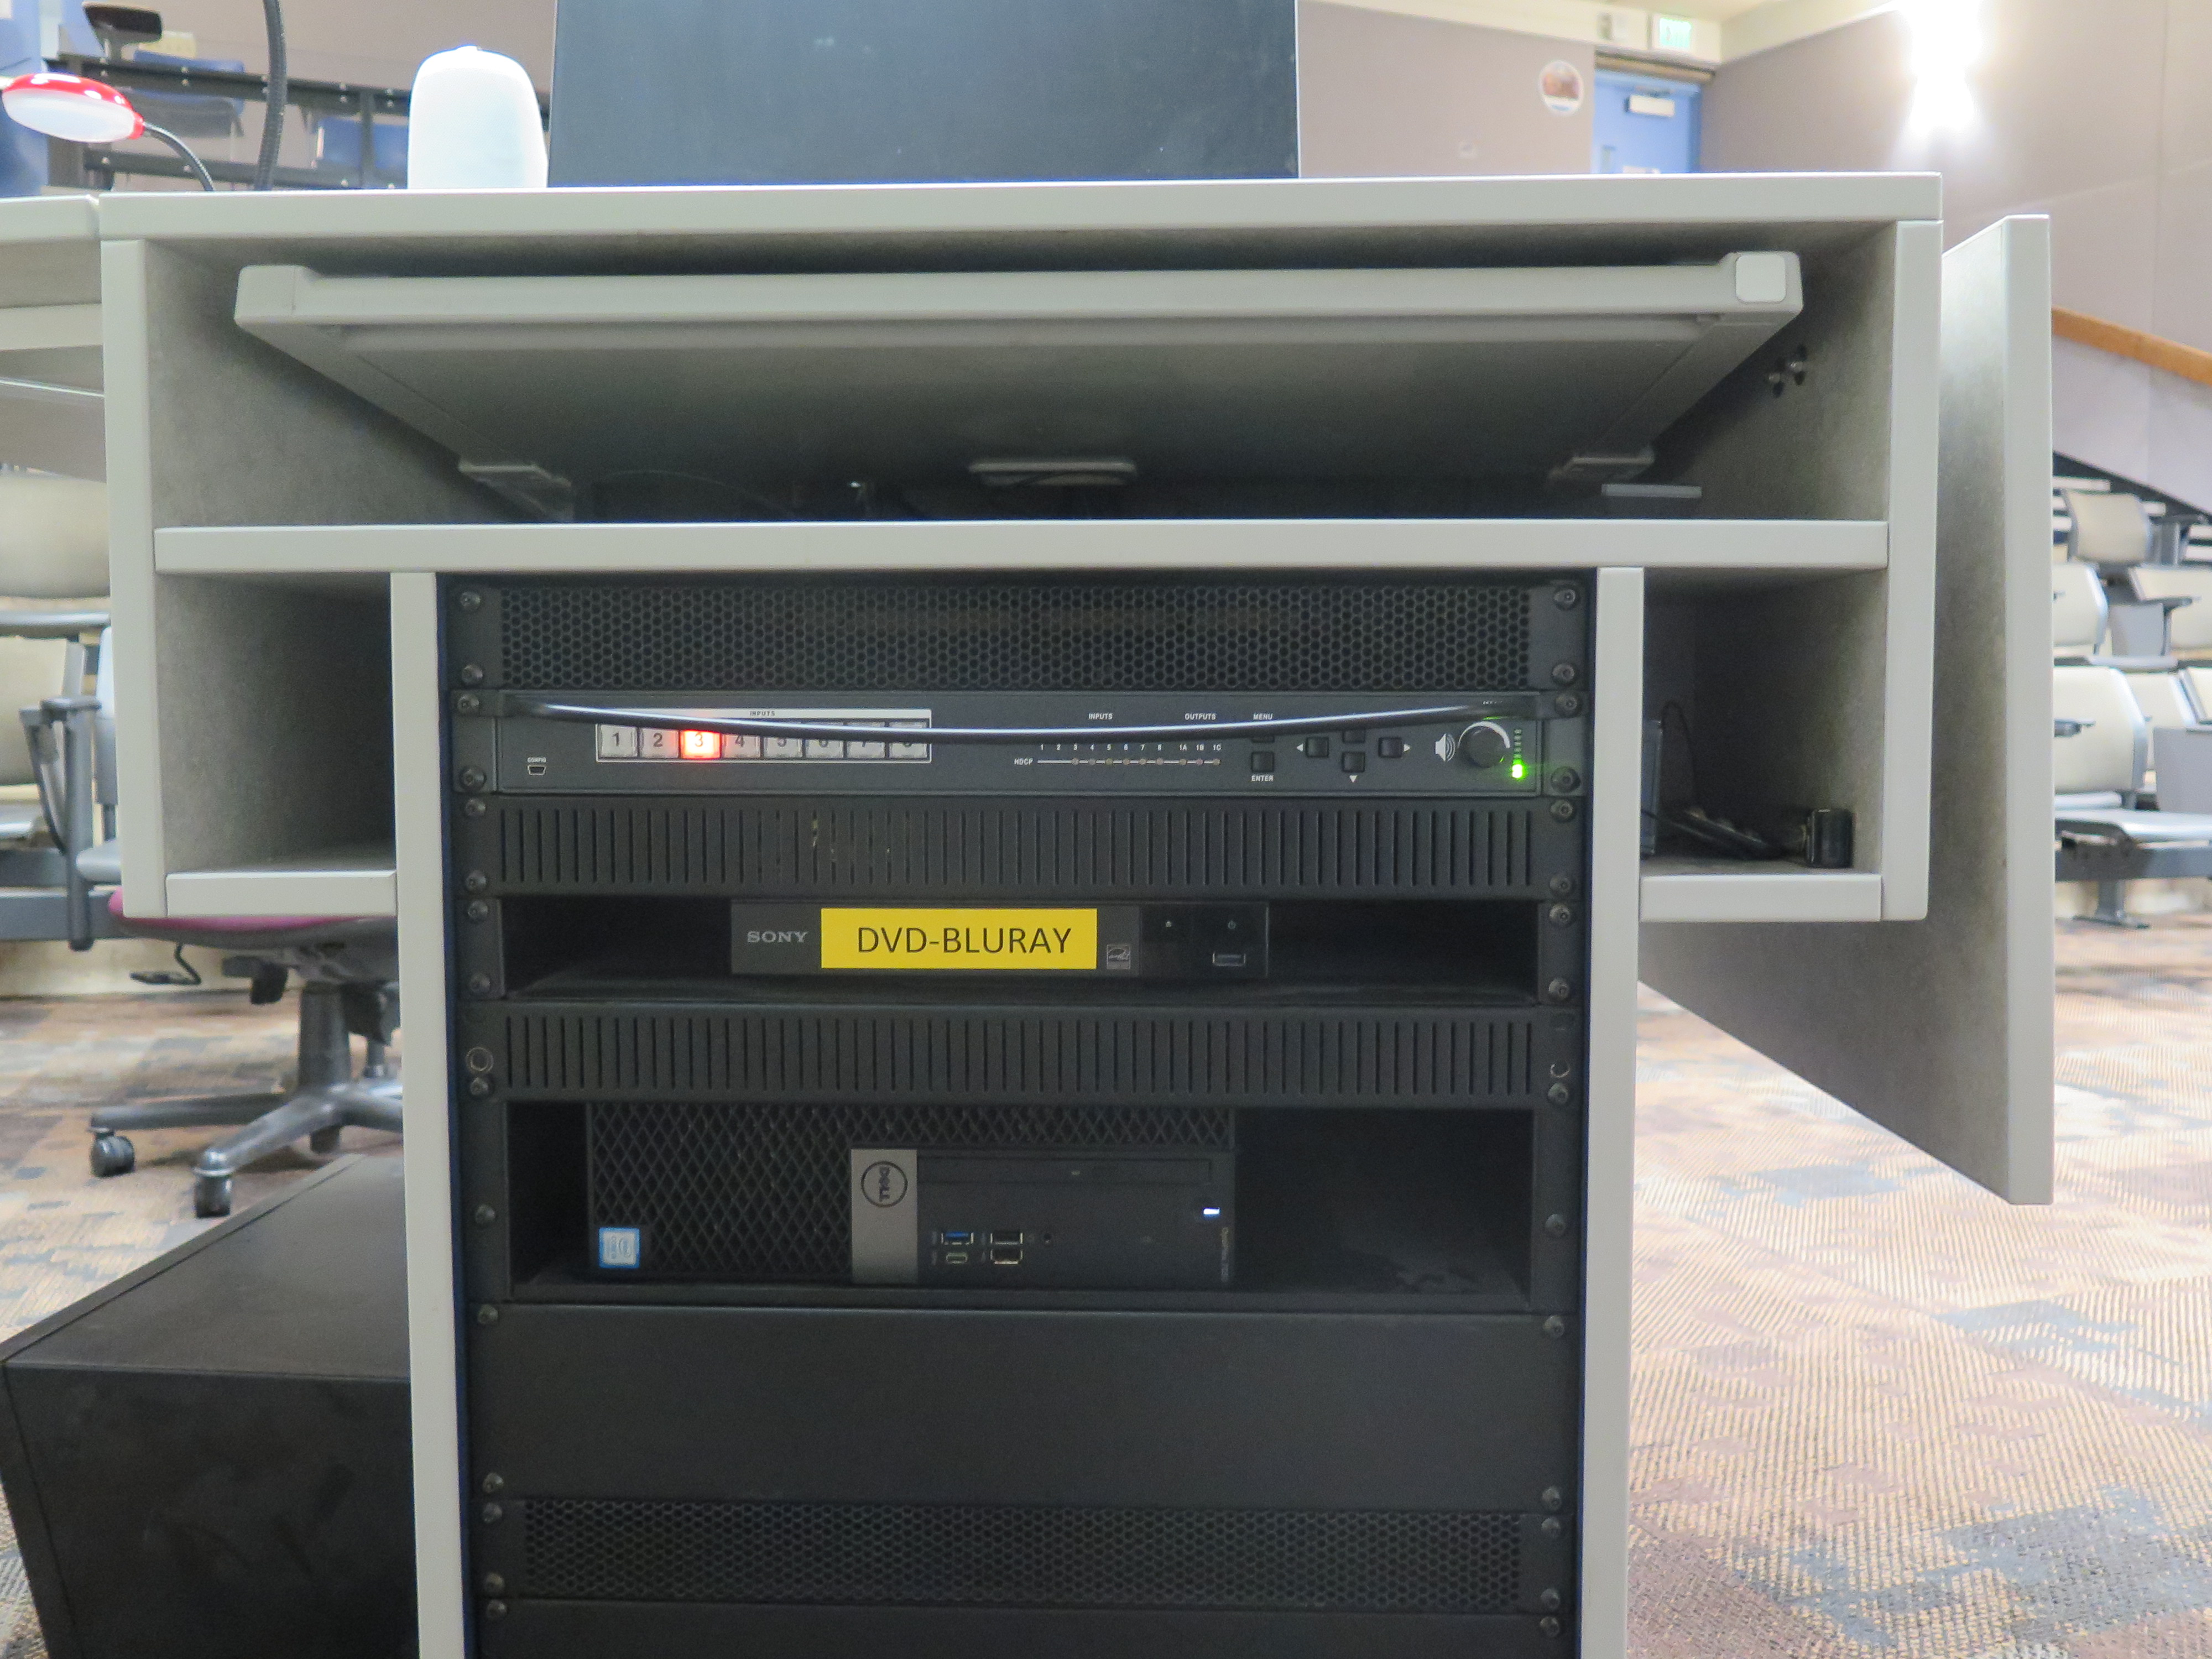 Equipment rack consists of AV Switcher, Blu-Ray/DVD Player and Dell Computer CPU.